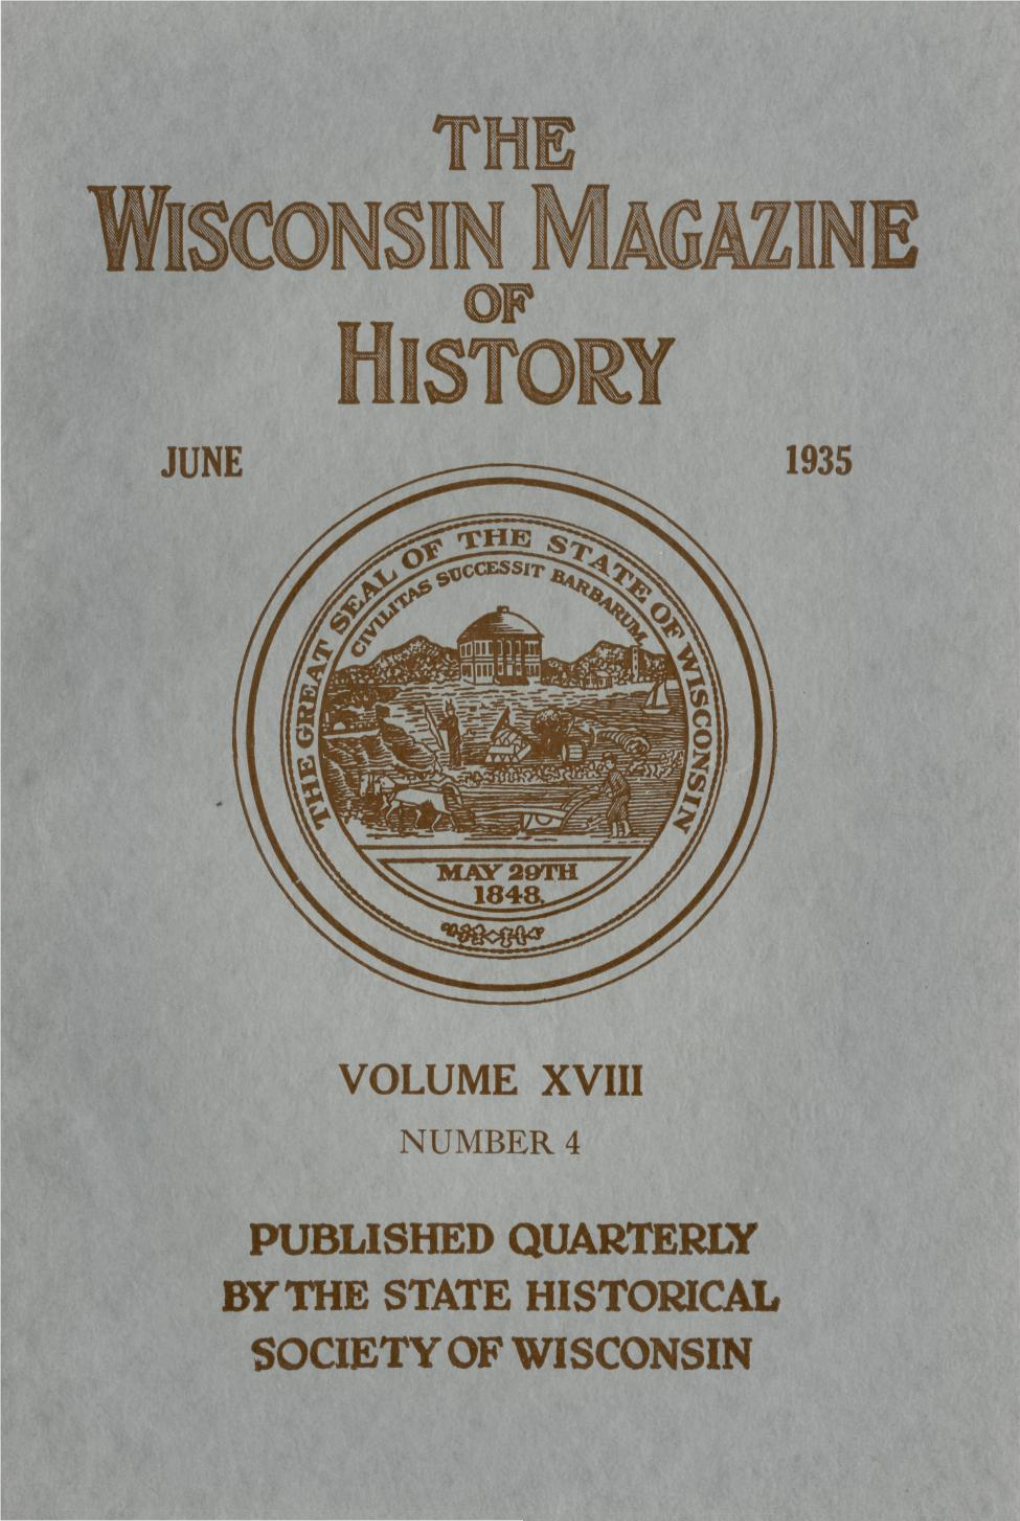 June 1935 Volume Xviii Published Quarterly Bythe State Historical Society of Wisconsin